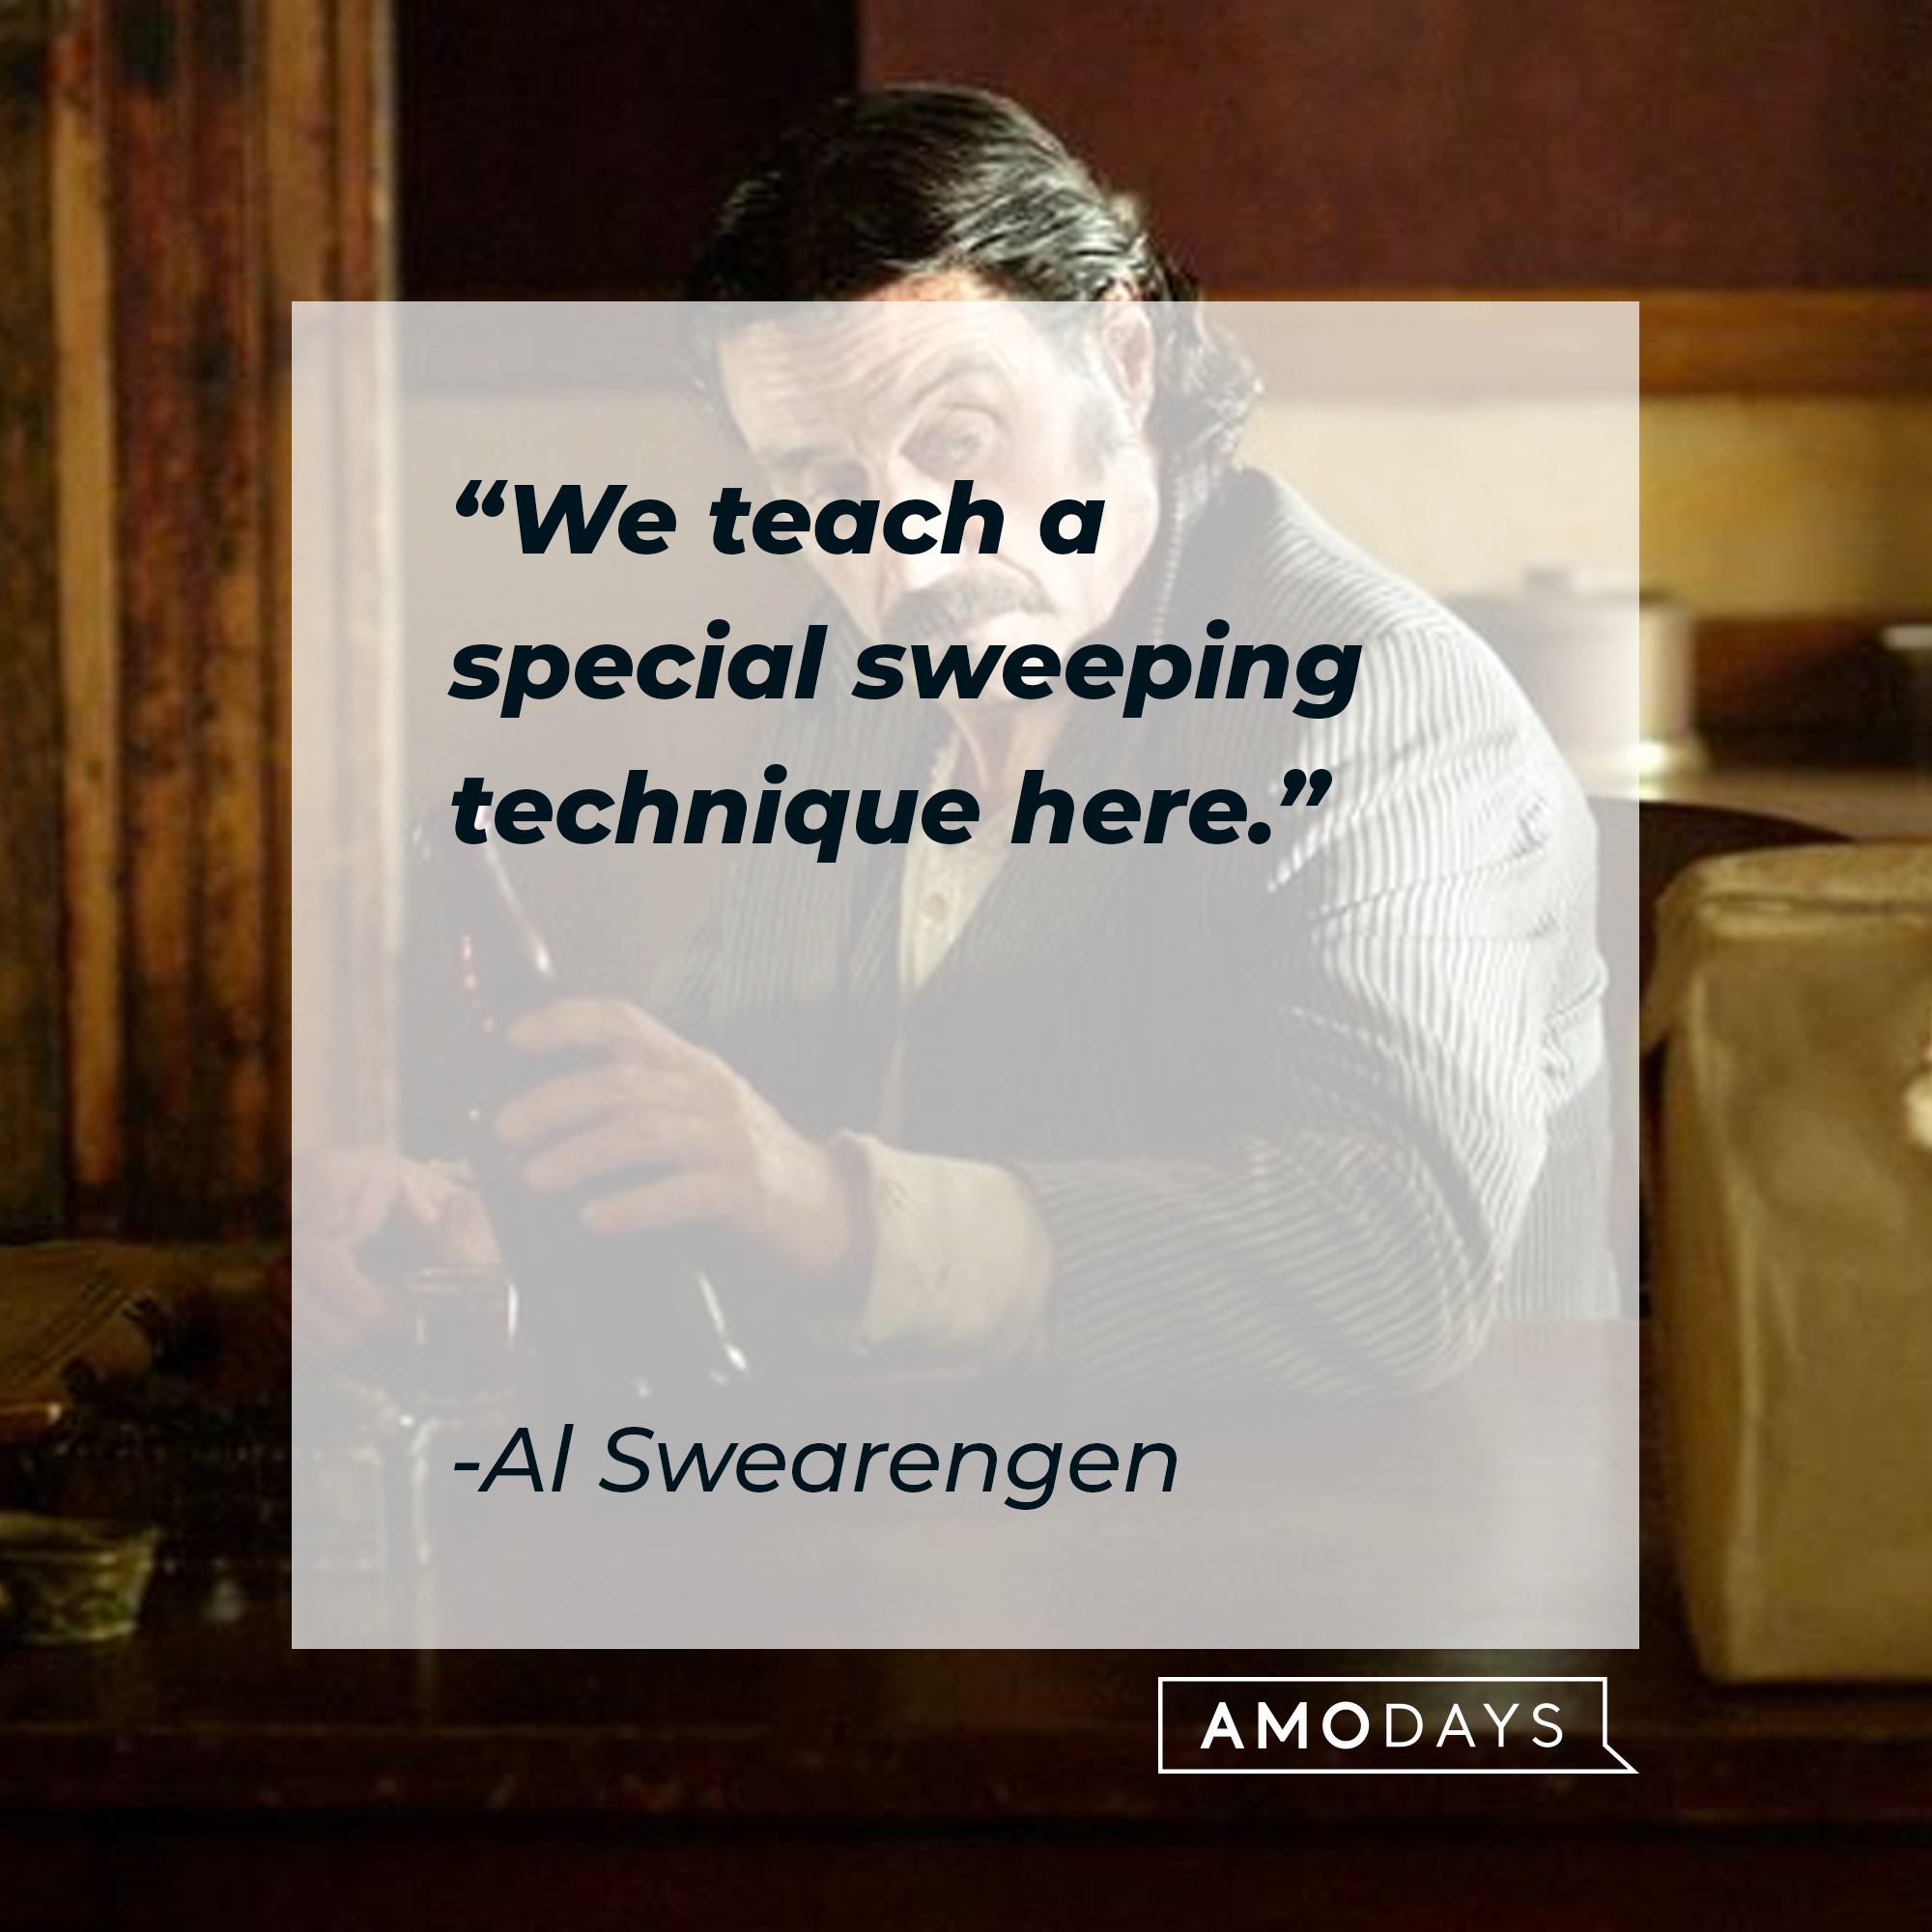 Al Swearengen with his quote, "We teach a special sweeping technique here." | Source: Facebook/Deadwood